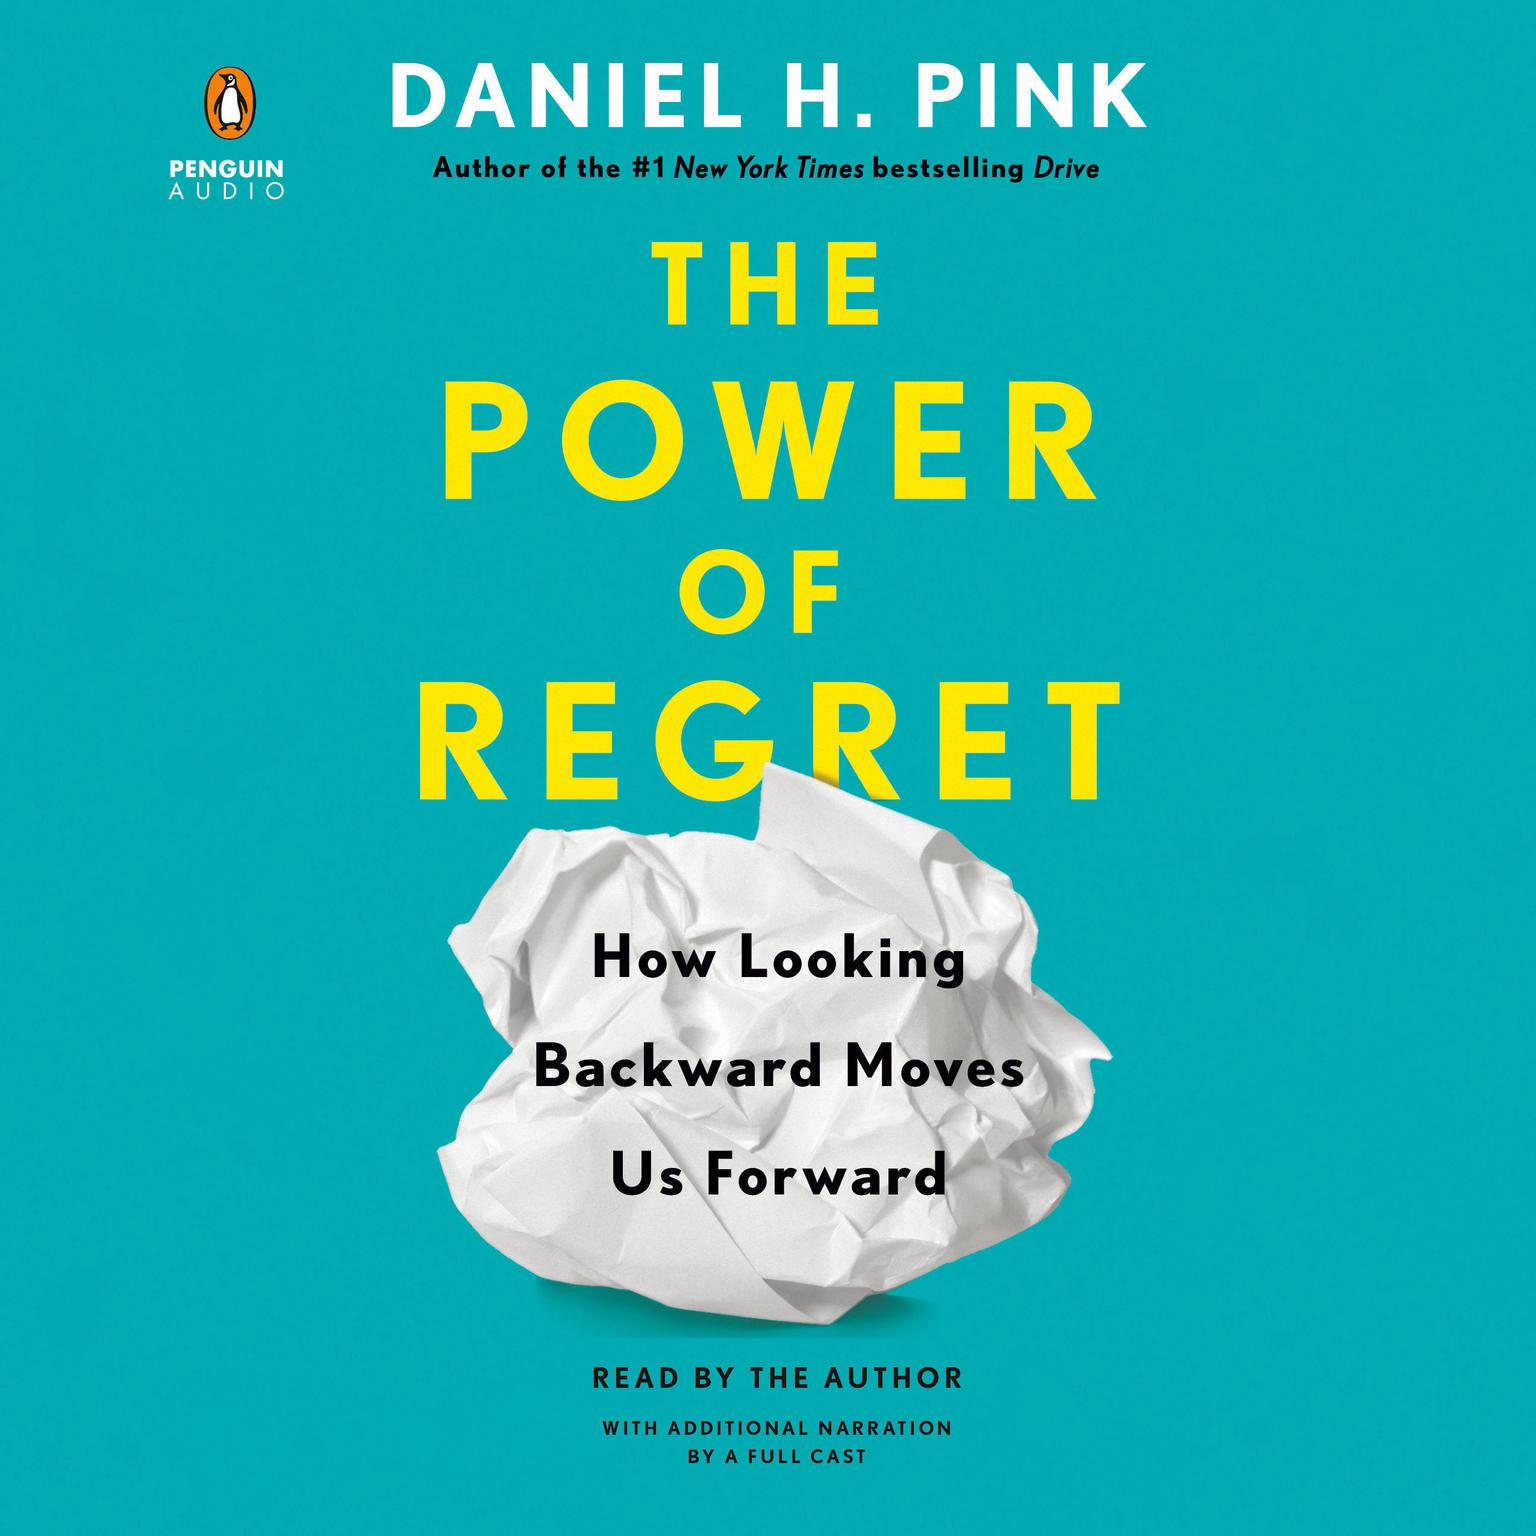 The Power of Regret: How Looking Backward Moves Us Forward Audiobook, by Daniel H. Pink